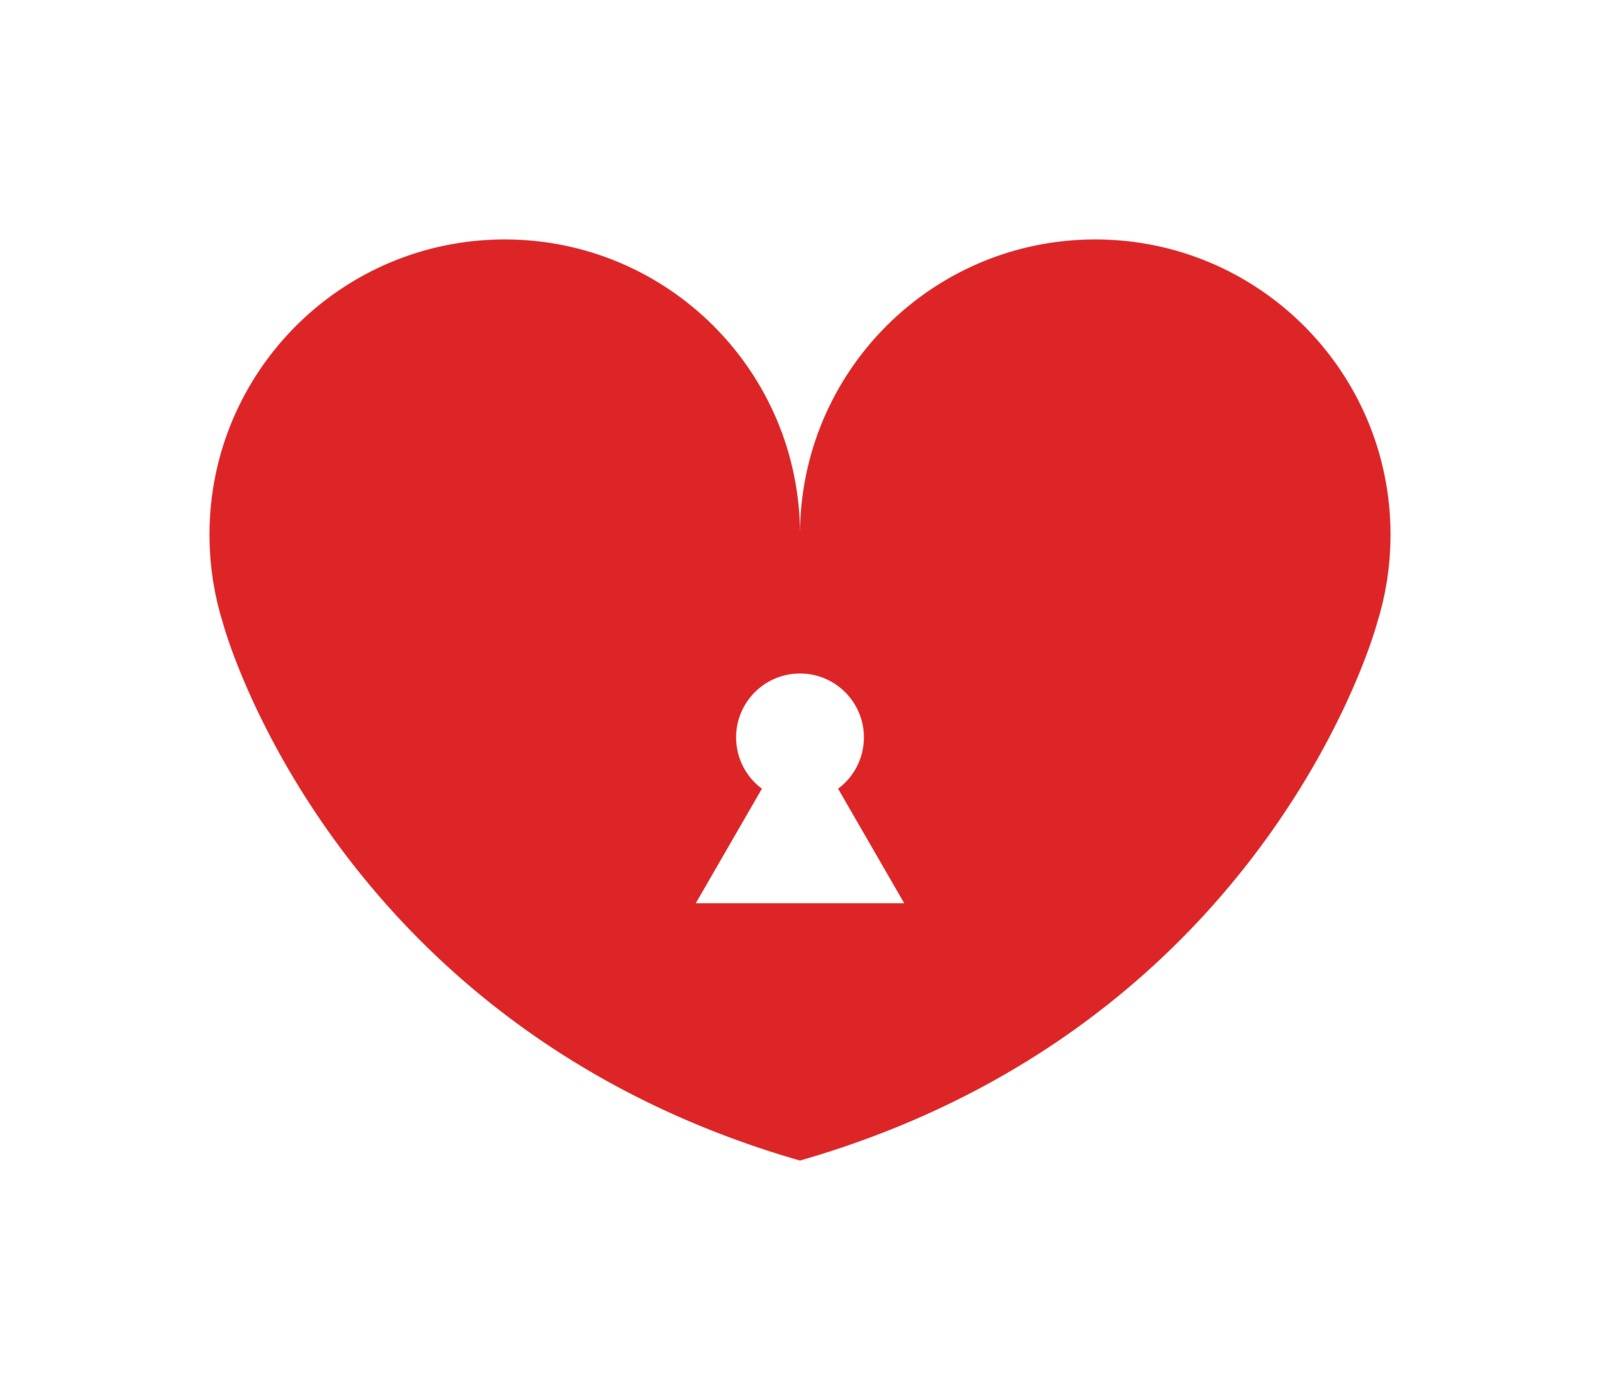 heart icon with padlock by Mark1987